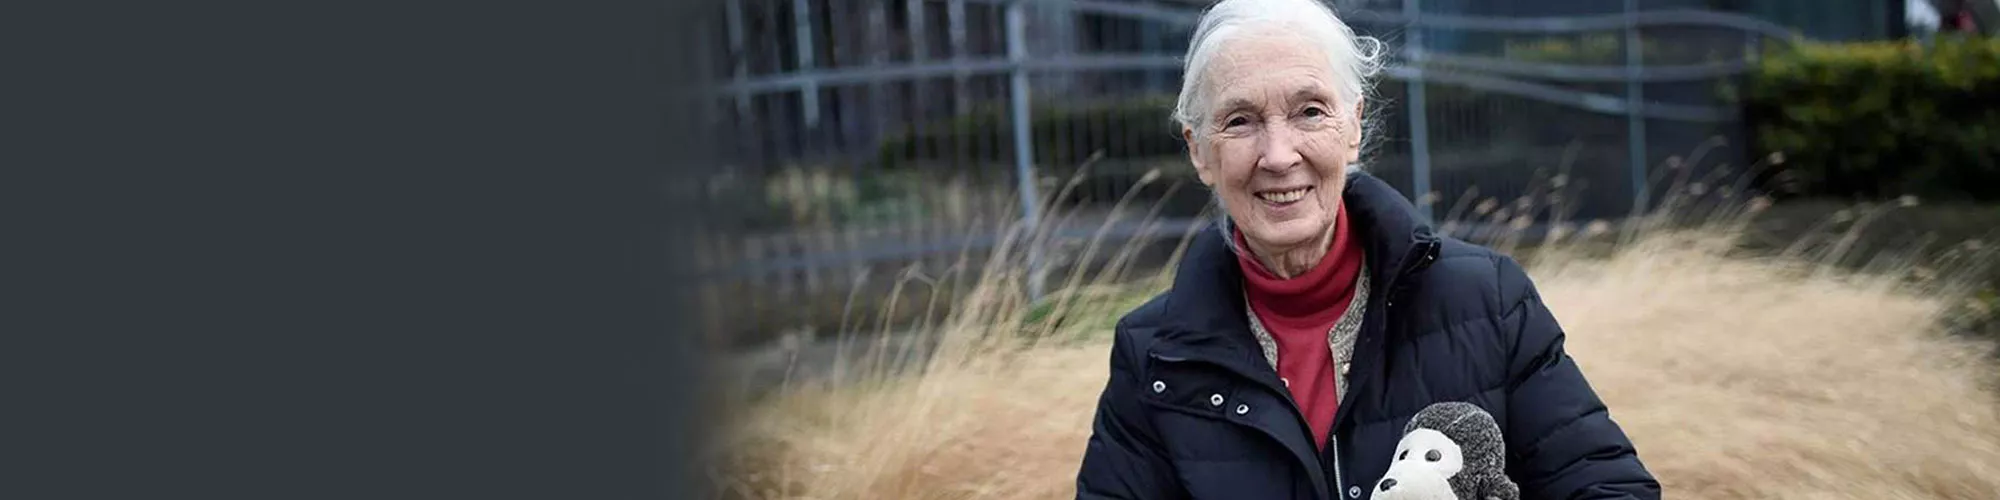 Hero image for the A Q&A with Dr. Jane Goodall page